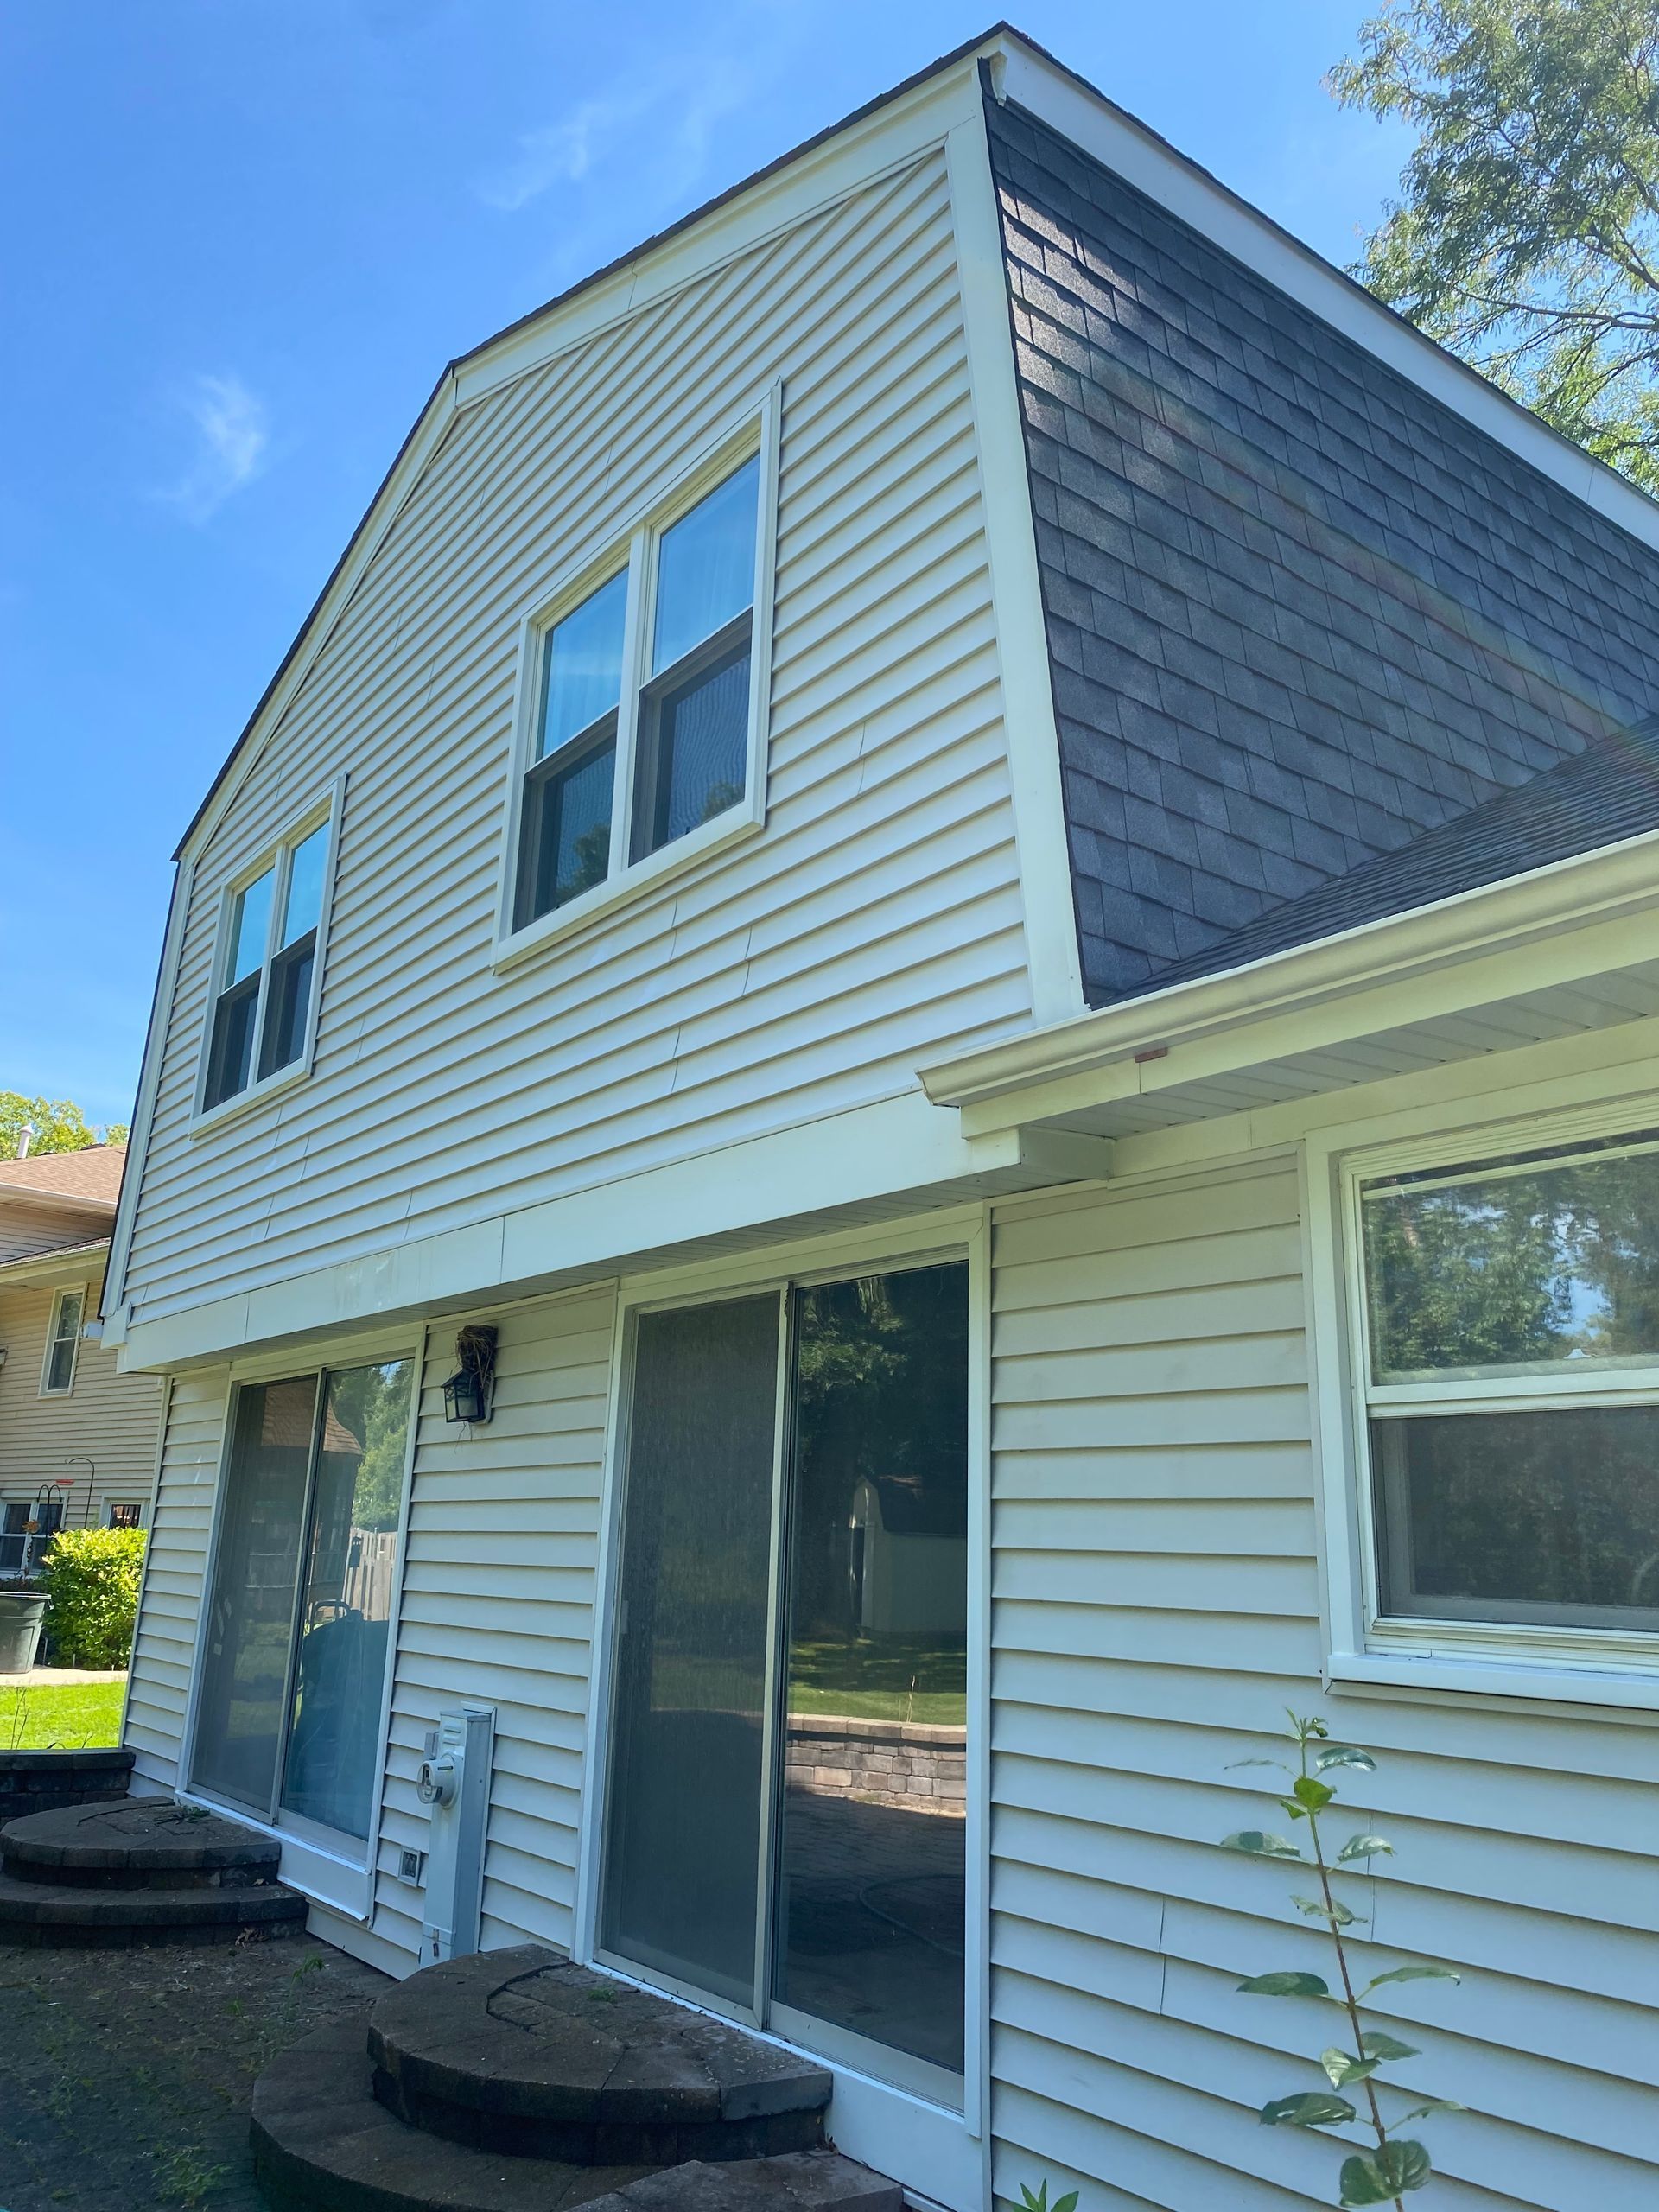 Clean New Siding - Lake Zurich, IL - Peter’s Power Wash Services